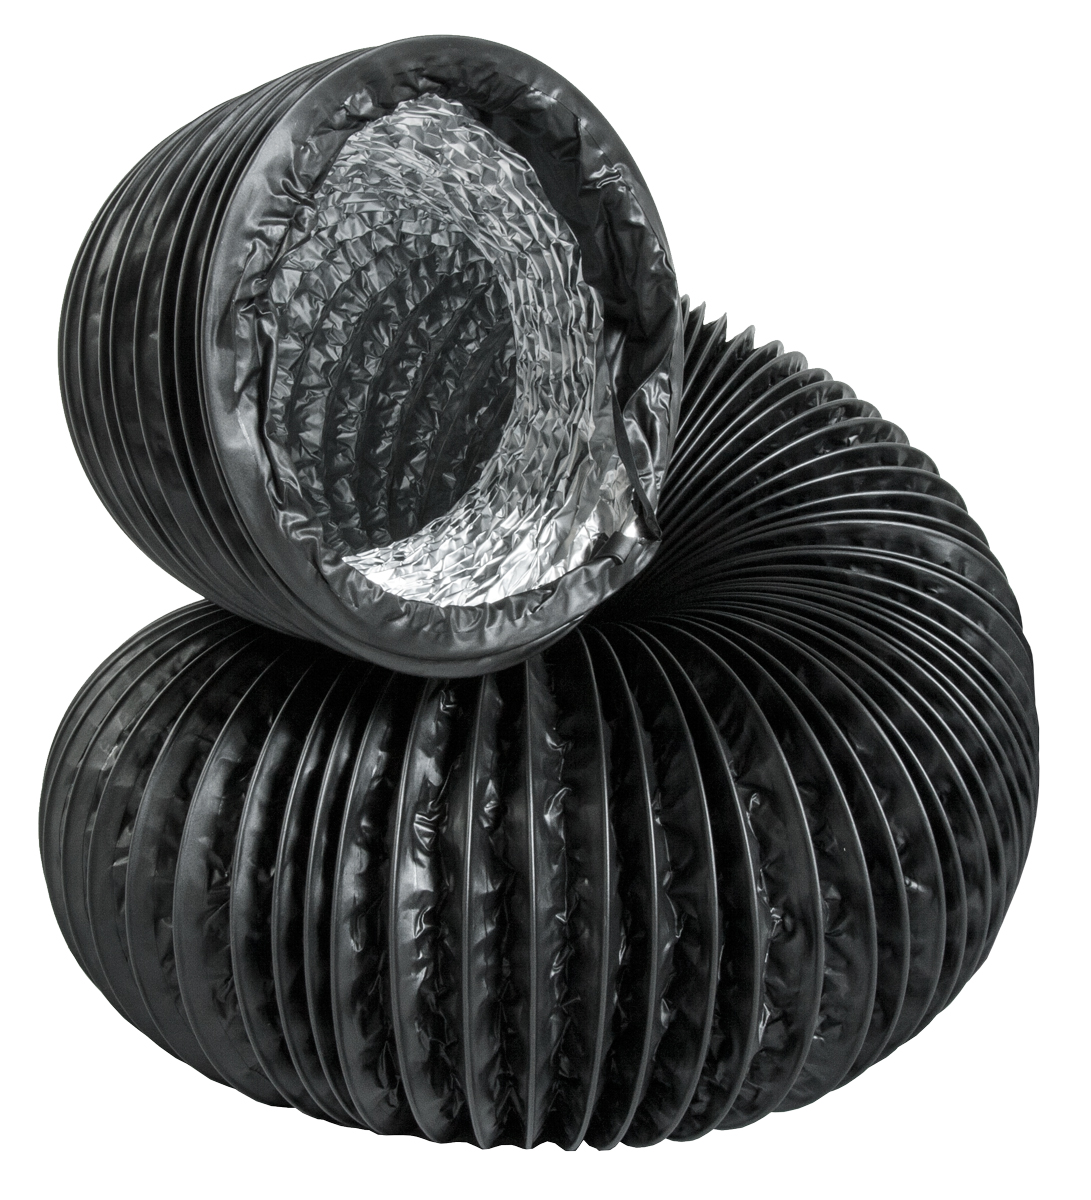 Picture for C.A.P. Black Lightproof Ducting w/Clamps. 6" - 25'